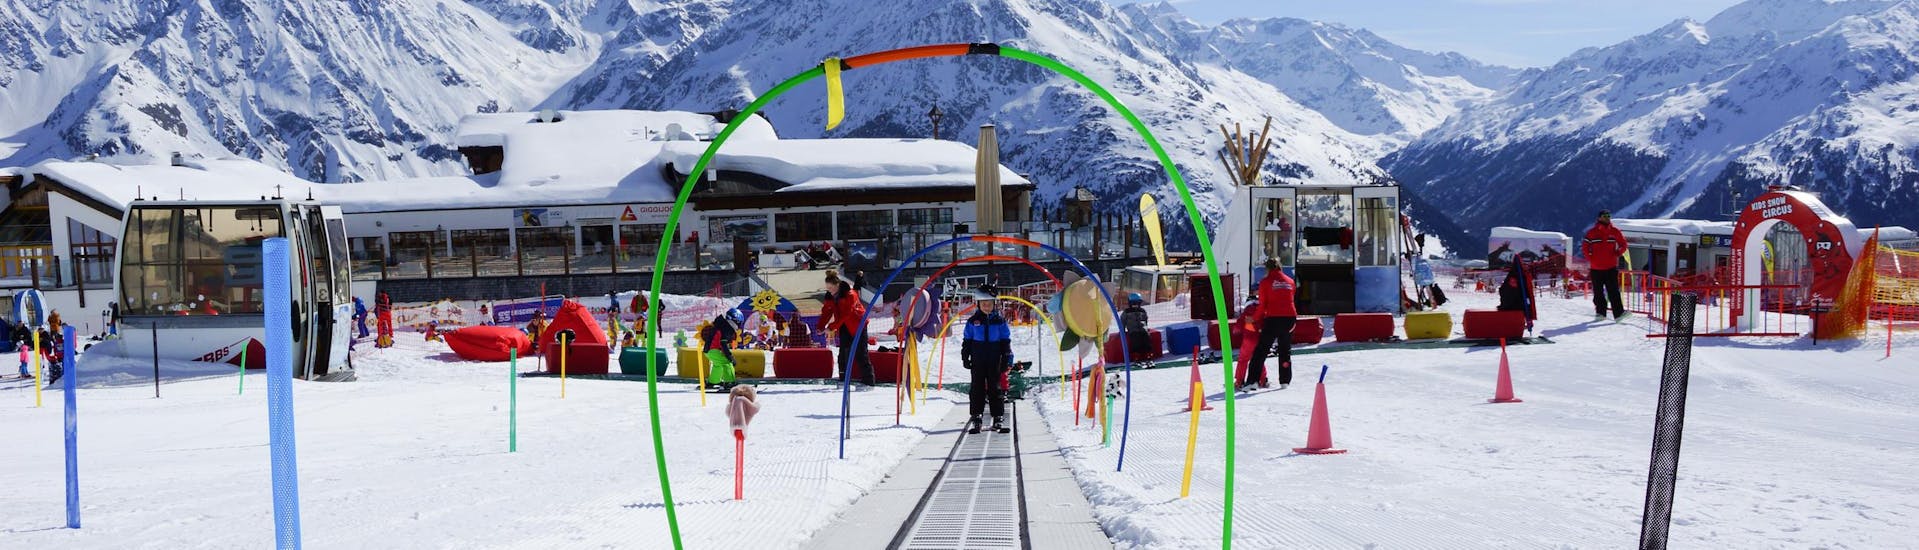 Kids Ski Lessons (9-15 y.) for First Timers incl. Ski Hire Package.